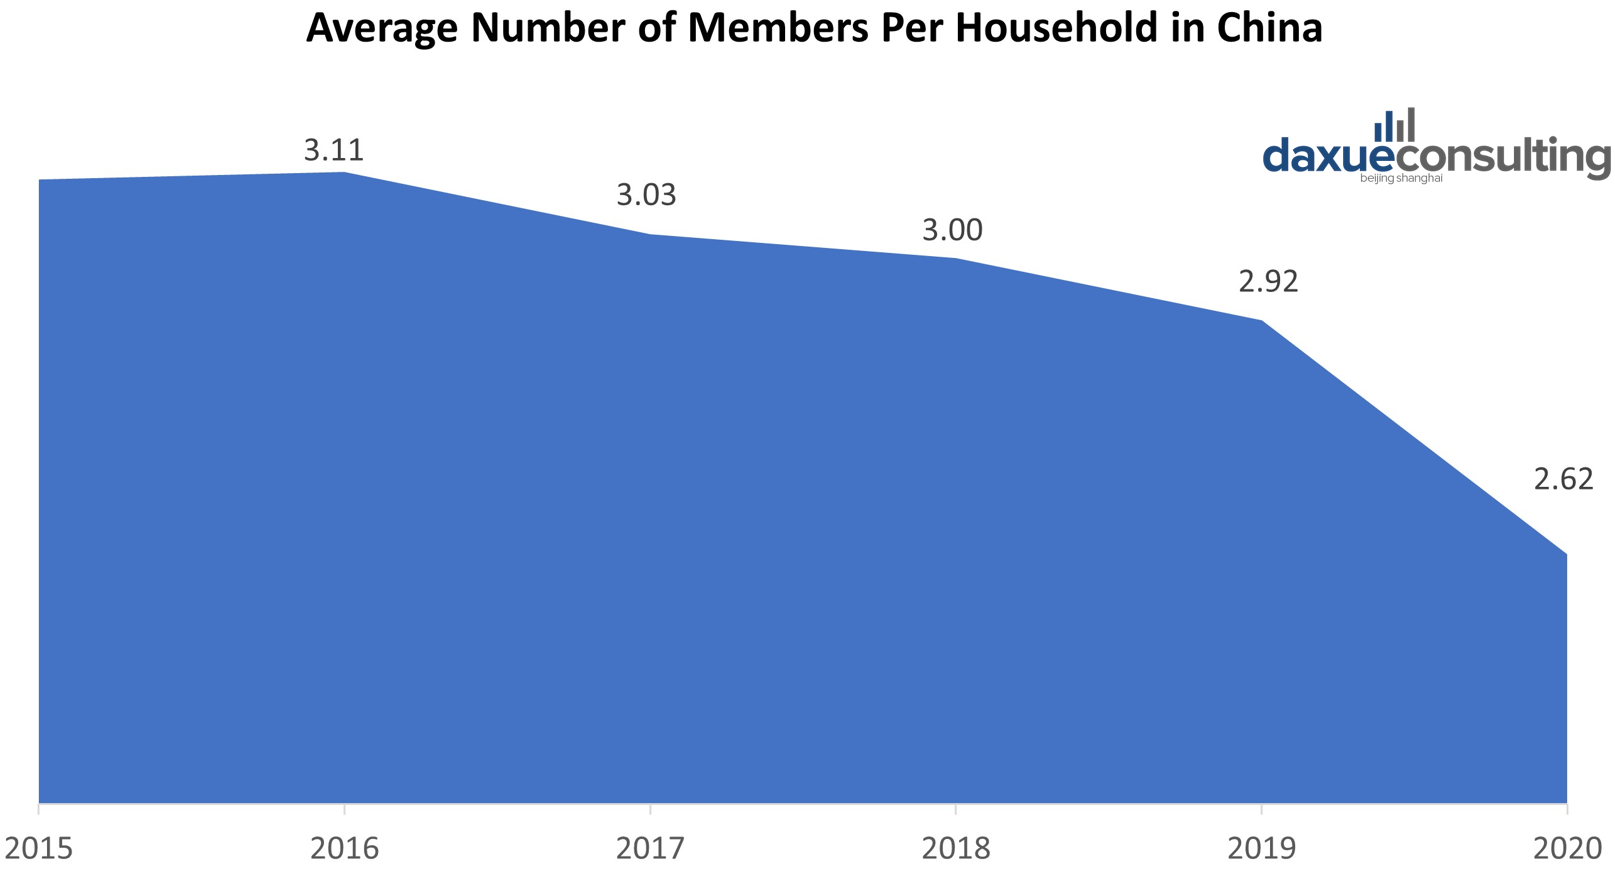 shrinking average household size in China over the years Packaging